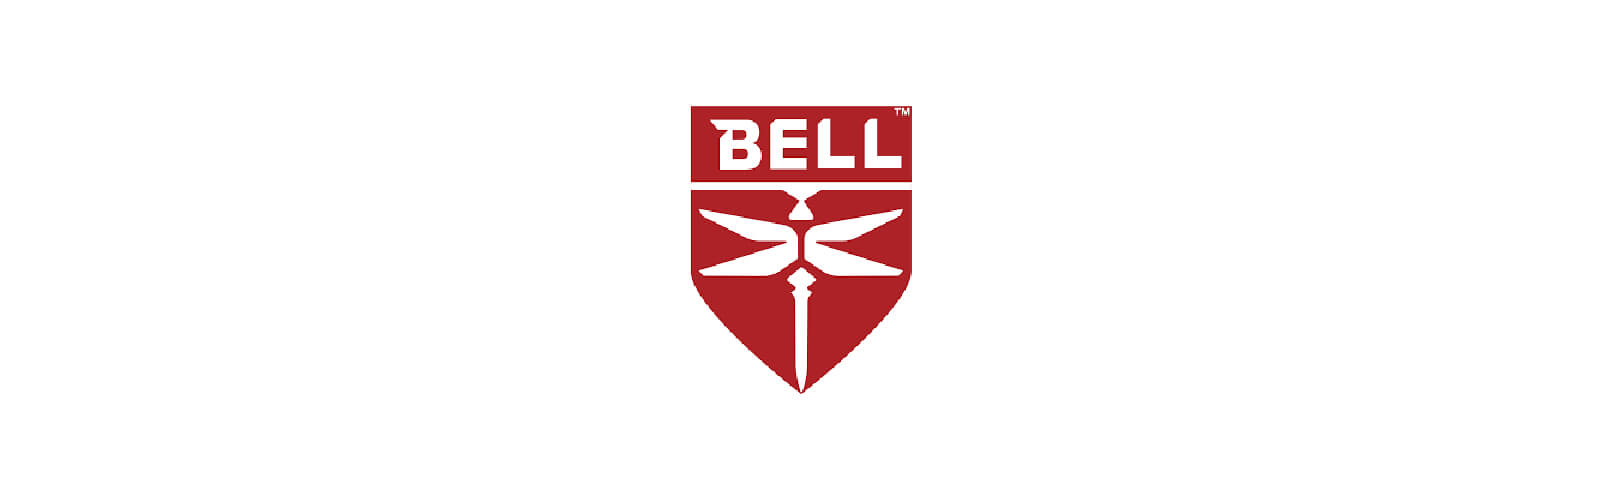 GPMS & Bell Announce Exclusive Distribution Agreement for GPMS’ Foresight MX Predictive Health Monitoring System for Bell 407 Helicopters